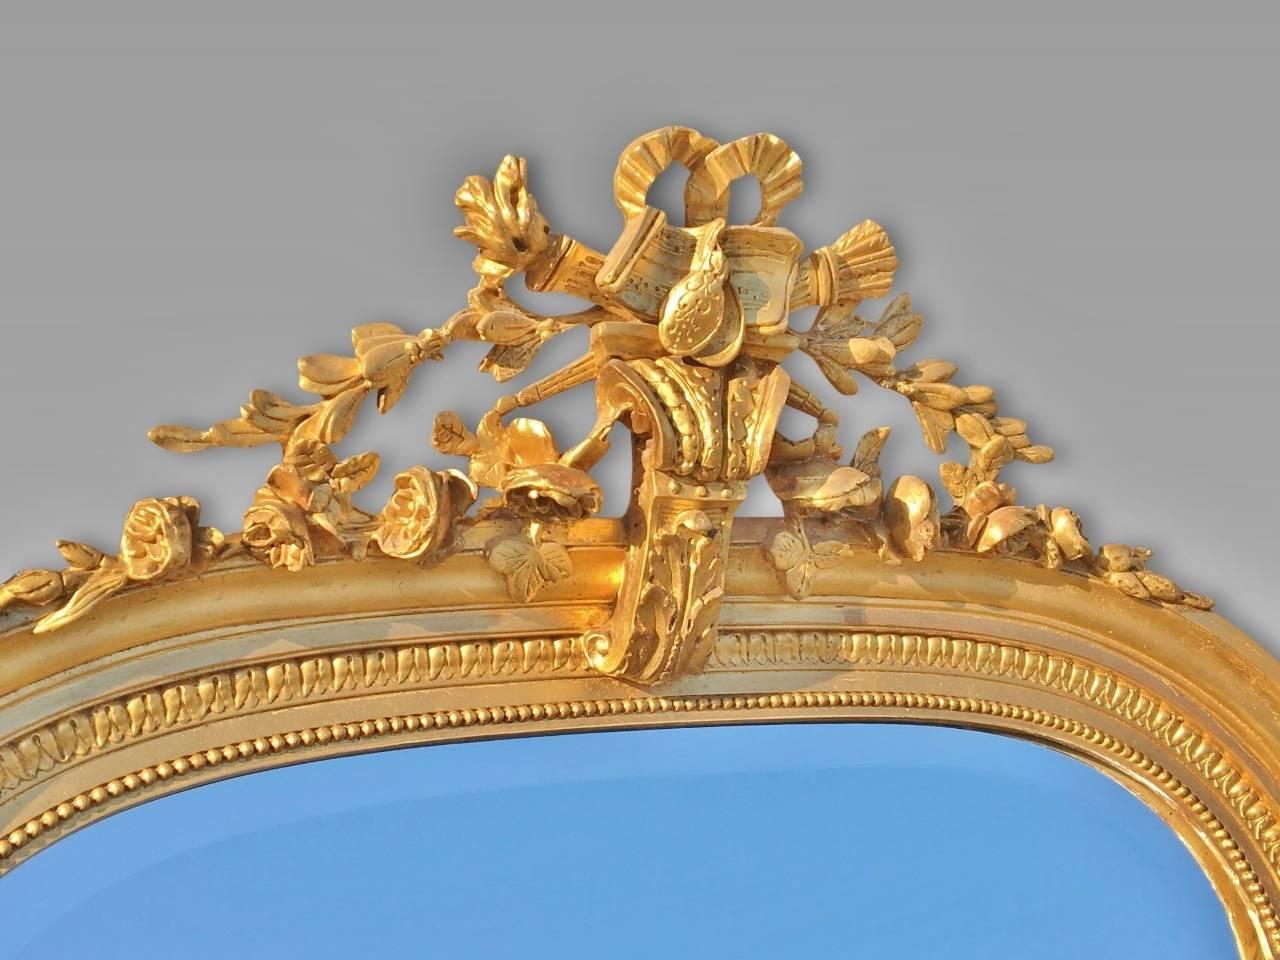 Very smart antique gilt wall mirror / overmantel mirror. French and dated circa 1890.
This delightful mirror is in fine condition with attractive gilding and carving / mouldings to the crest atop the mirror. The mirror glass is clear, bright and